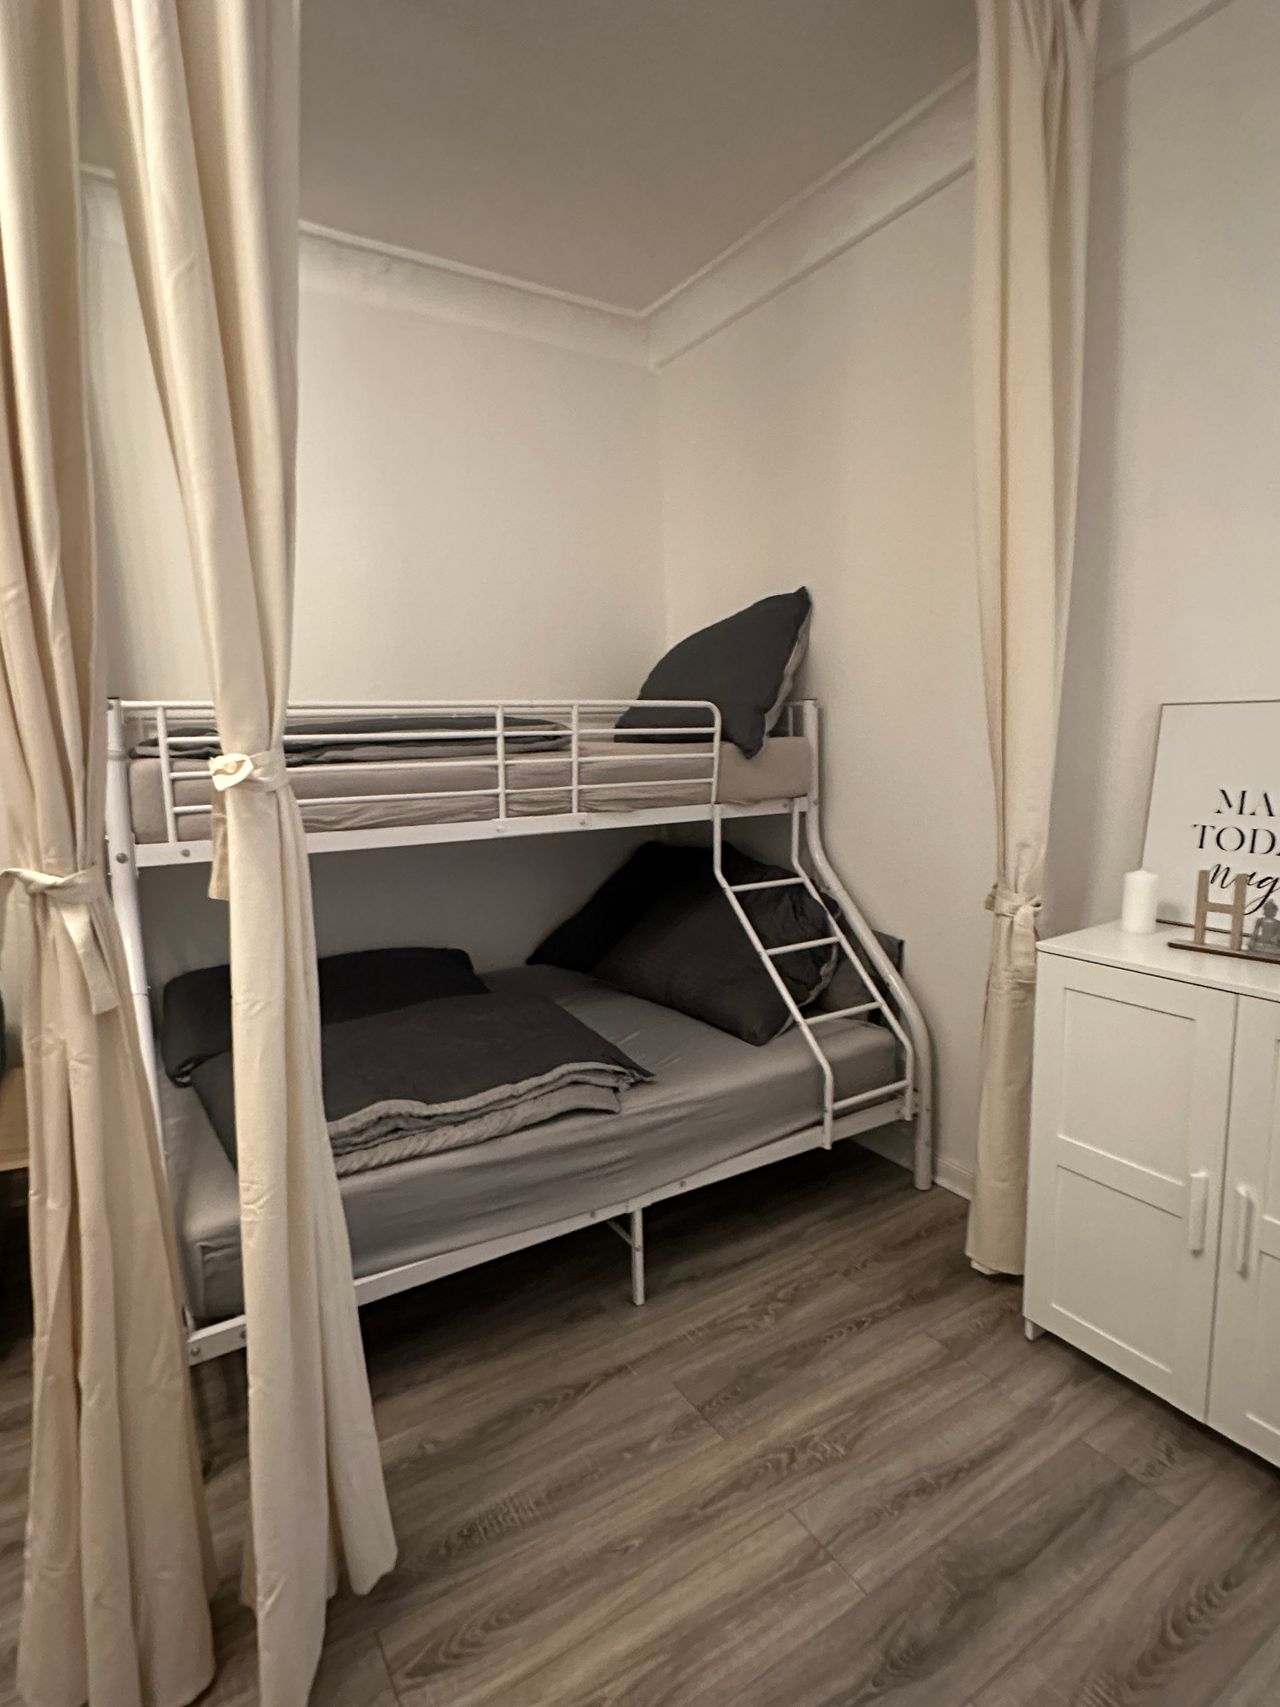 Fully furnished two-room apartment in an old building in Neukölln near Tempelhofer Feld